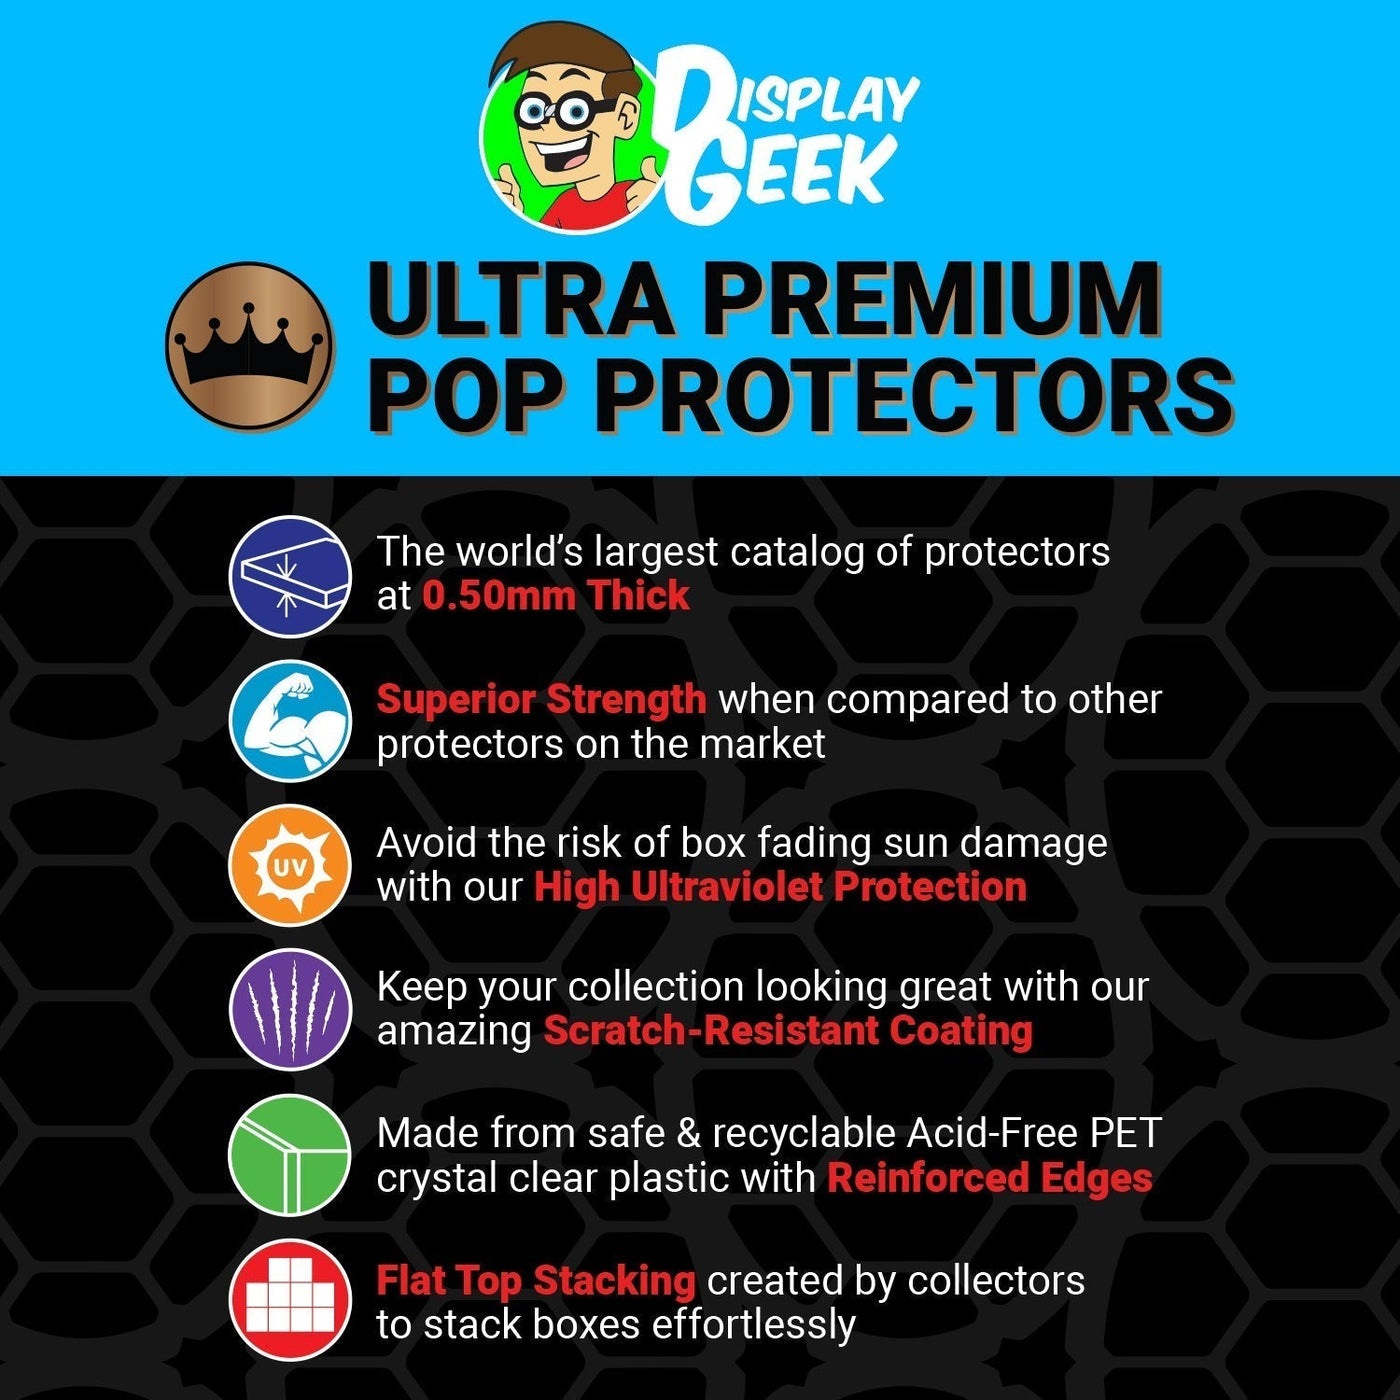 Pop Protector for Stitch Dracula FunkO's Cereal Box on The Protector Guide App by Display Geek